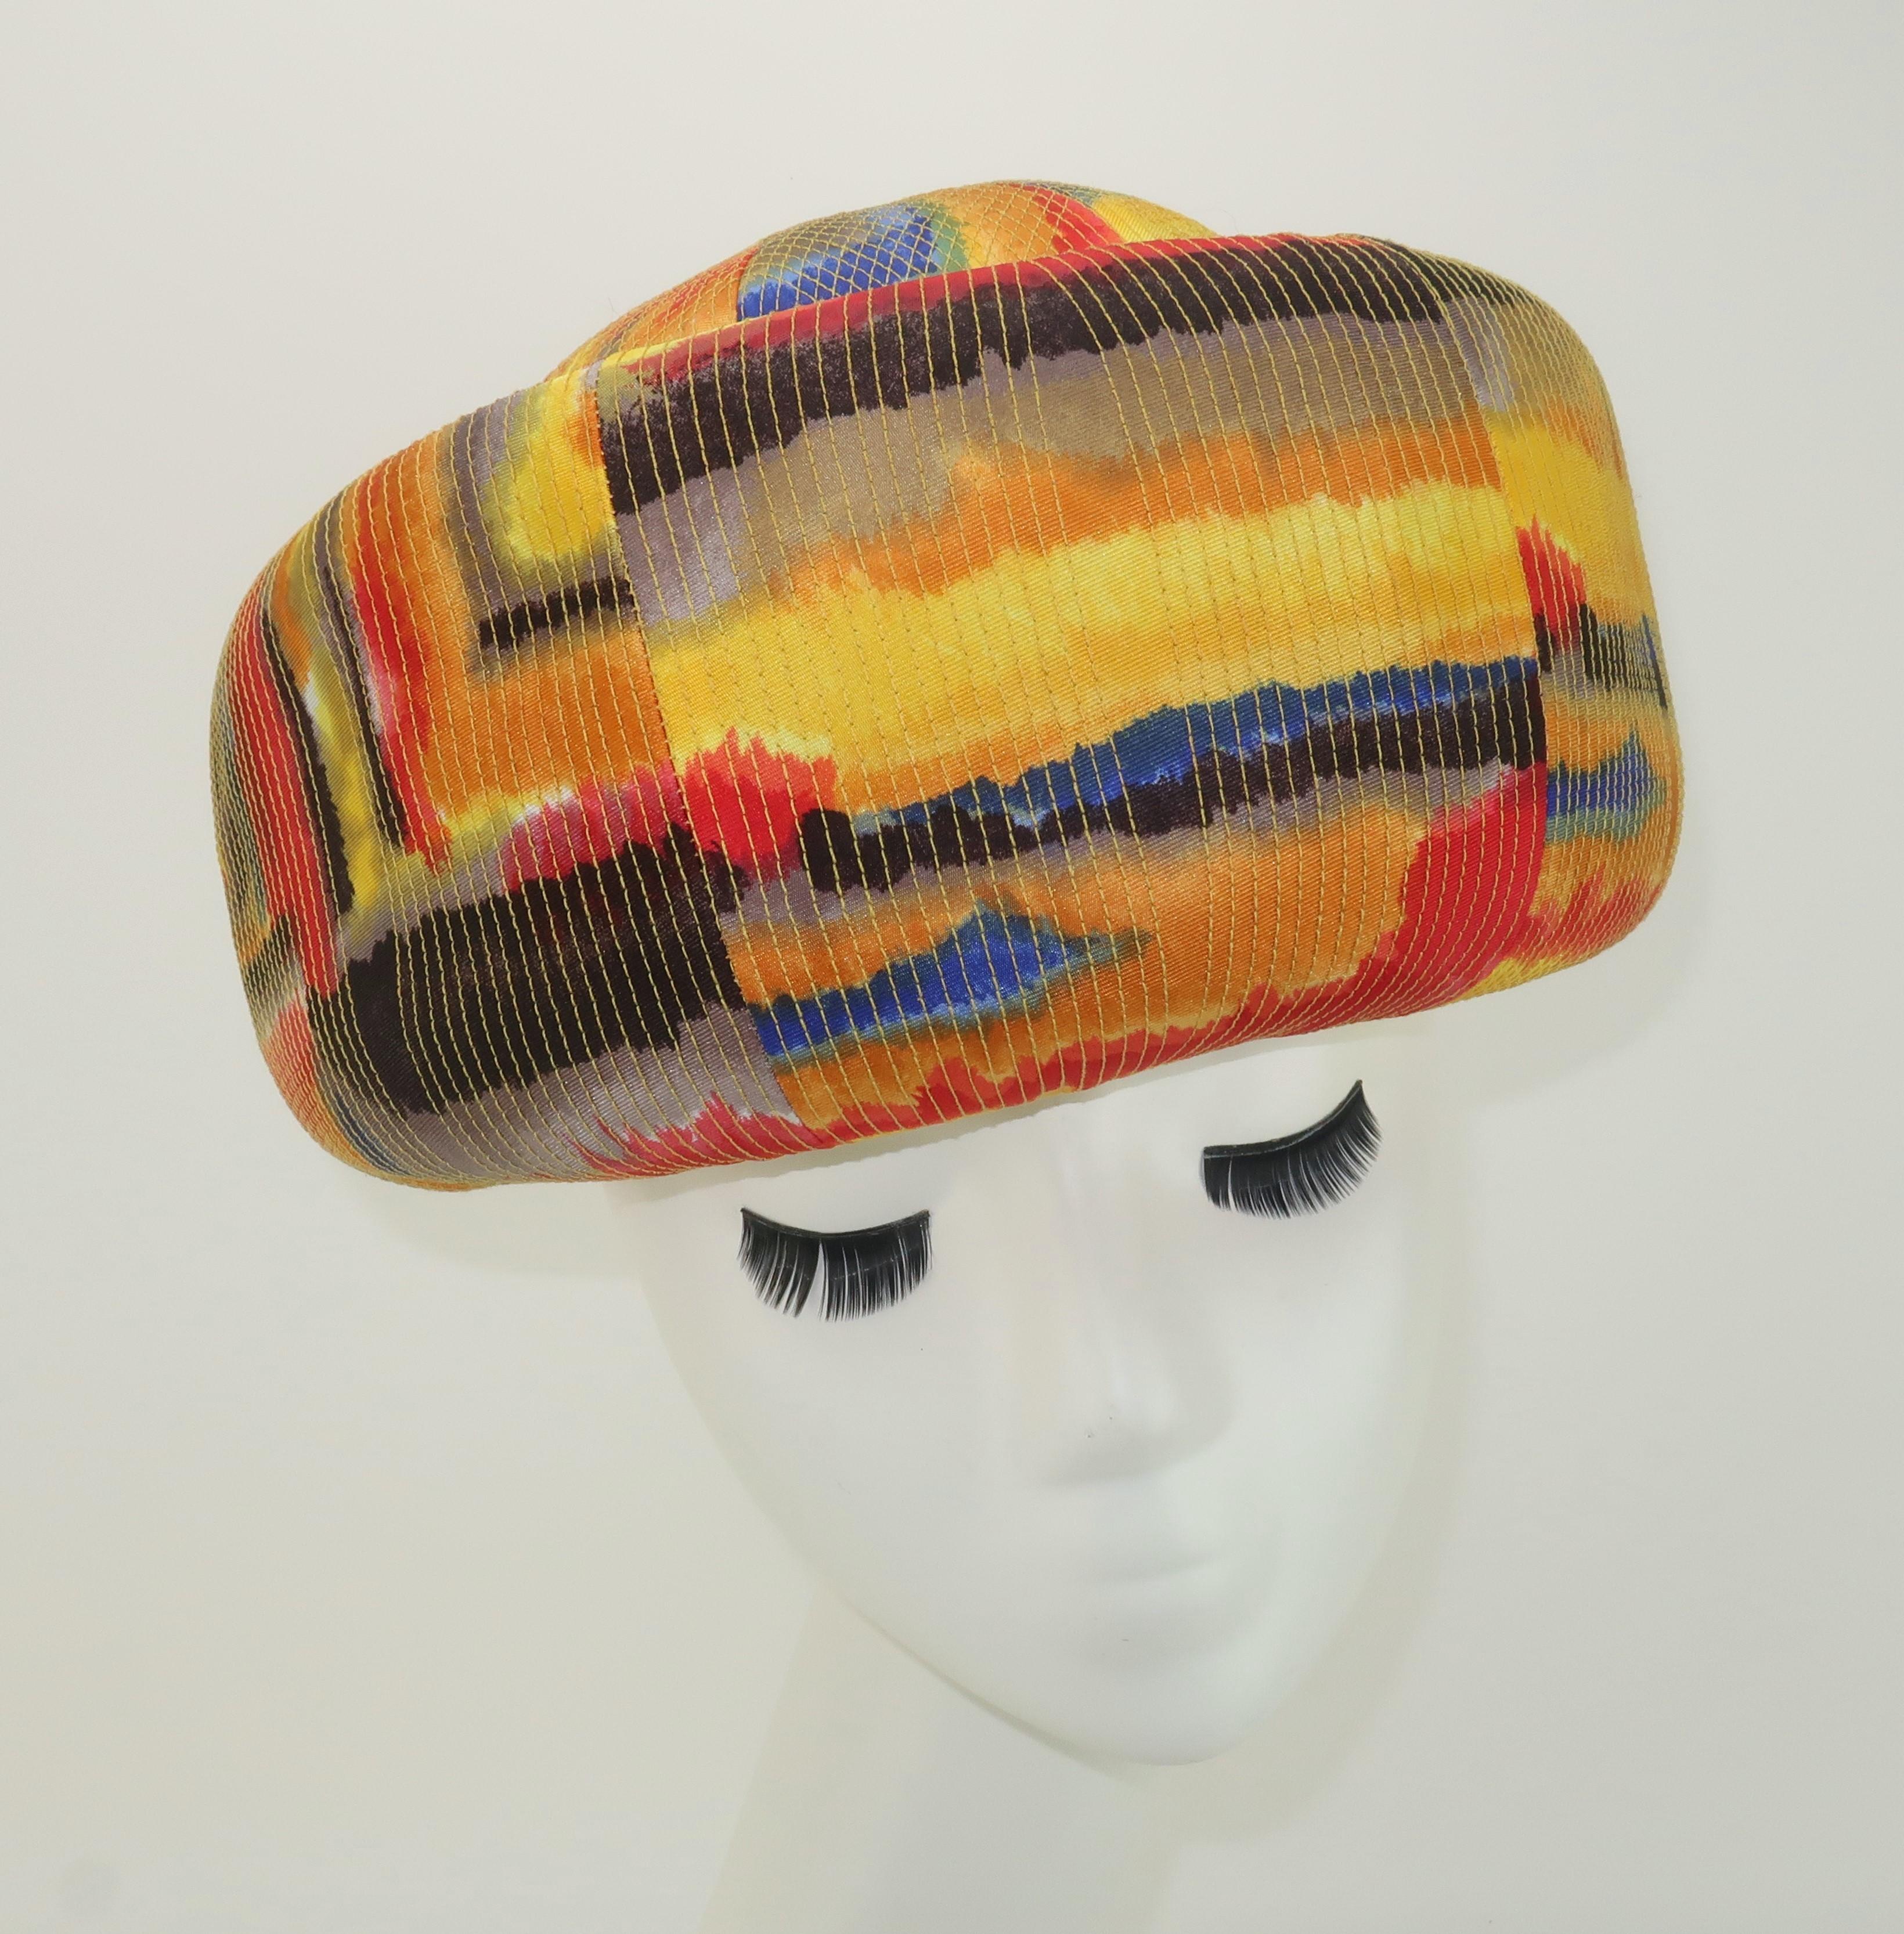 1960's Mr. John hat with an exaggerated pillbox silhouette in a colorful silk faille fabric with intricate stitching and golden yellow grosgrain band.  The mod print is reminiscent of watercolors with blended lines of yellow, golden yellow, blue,